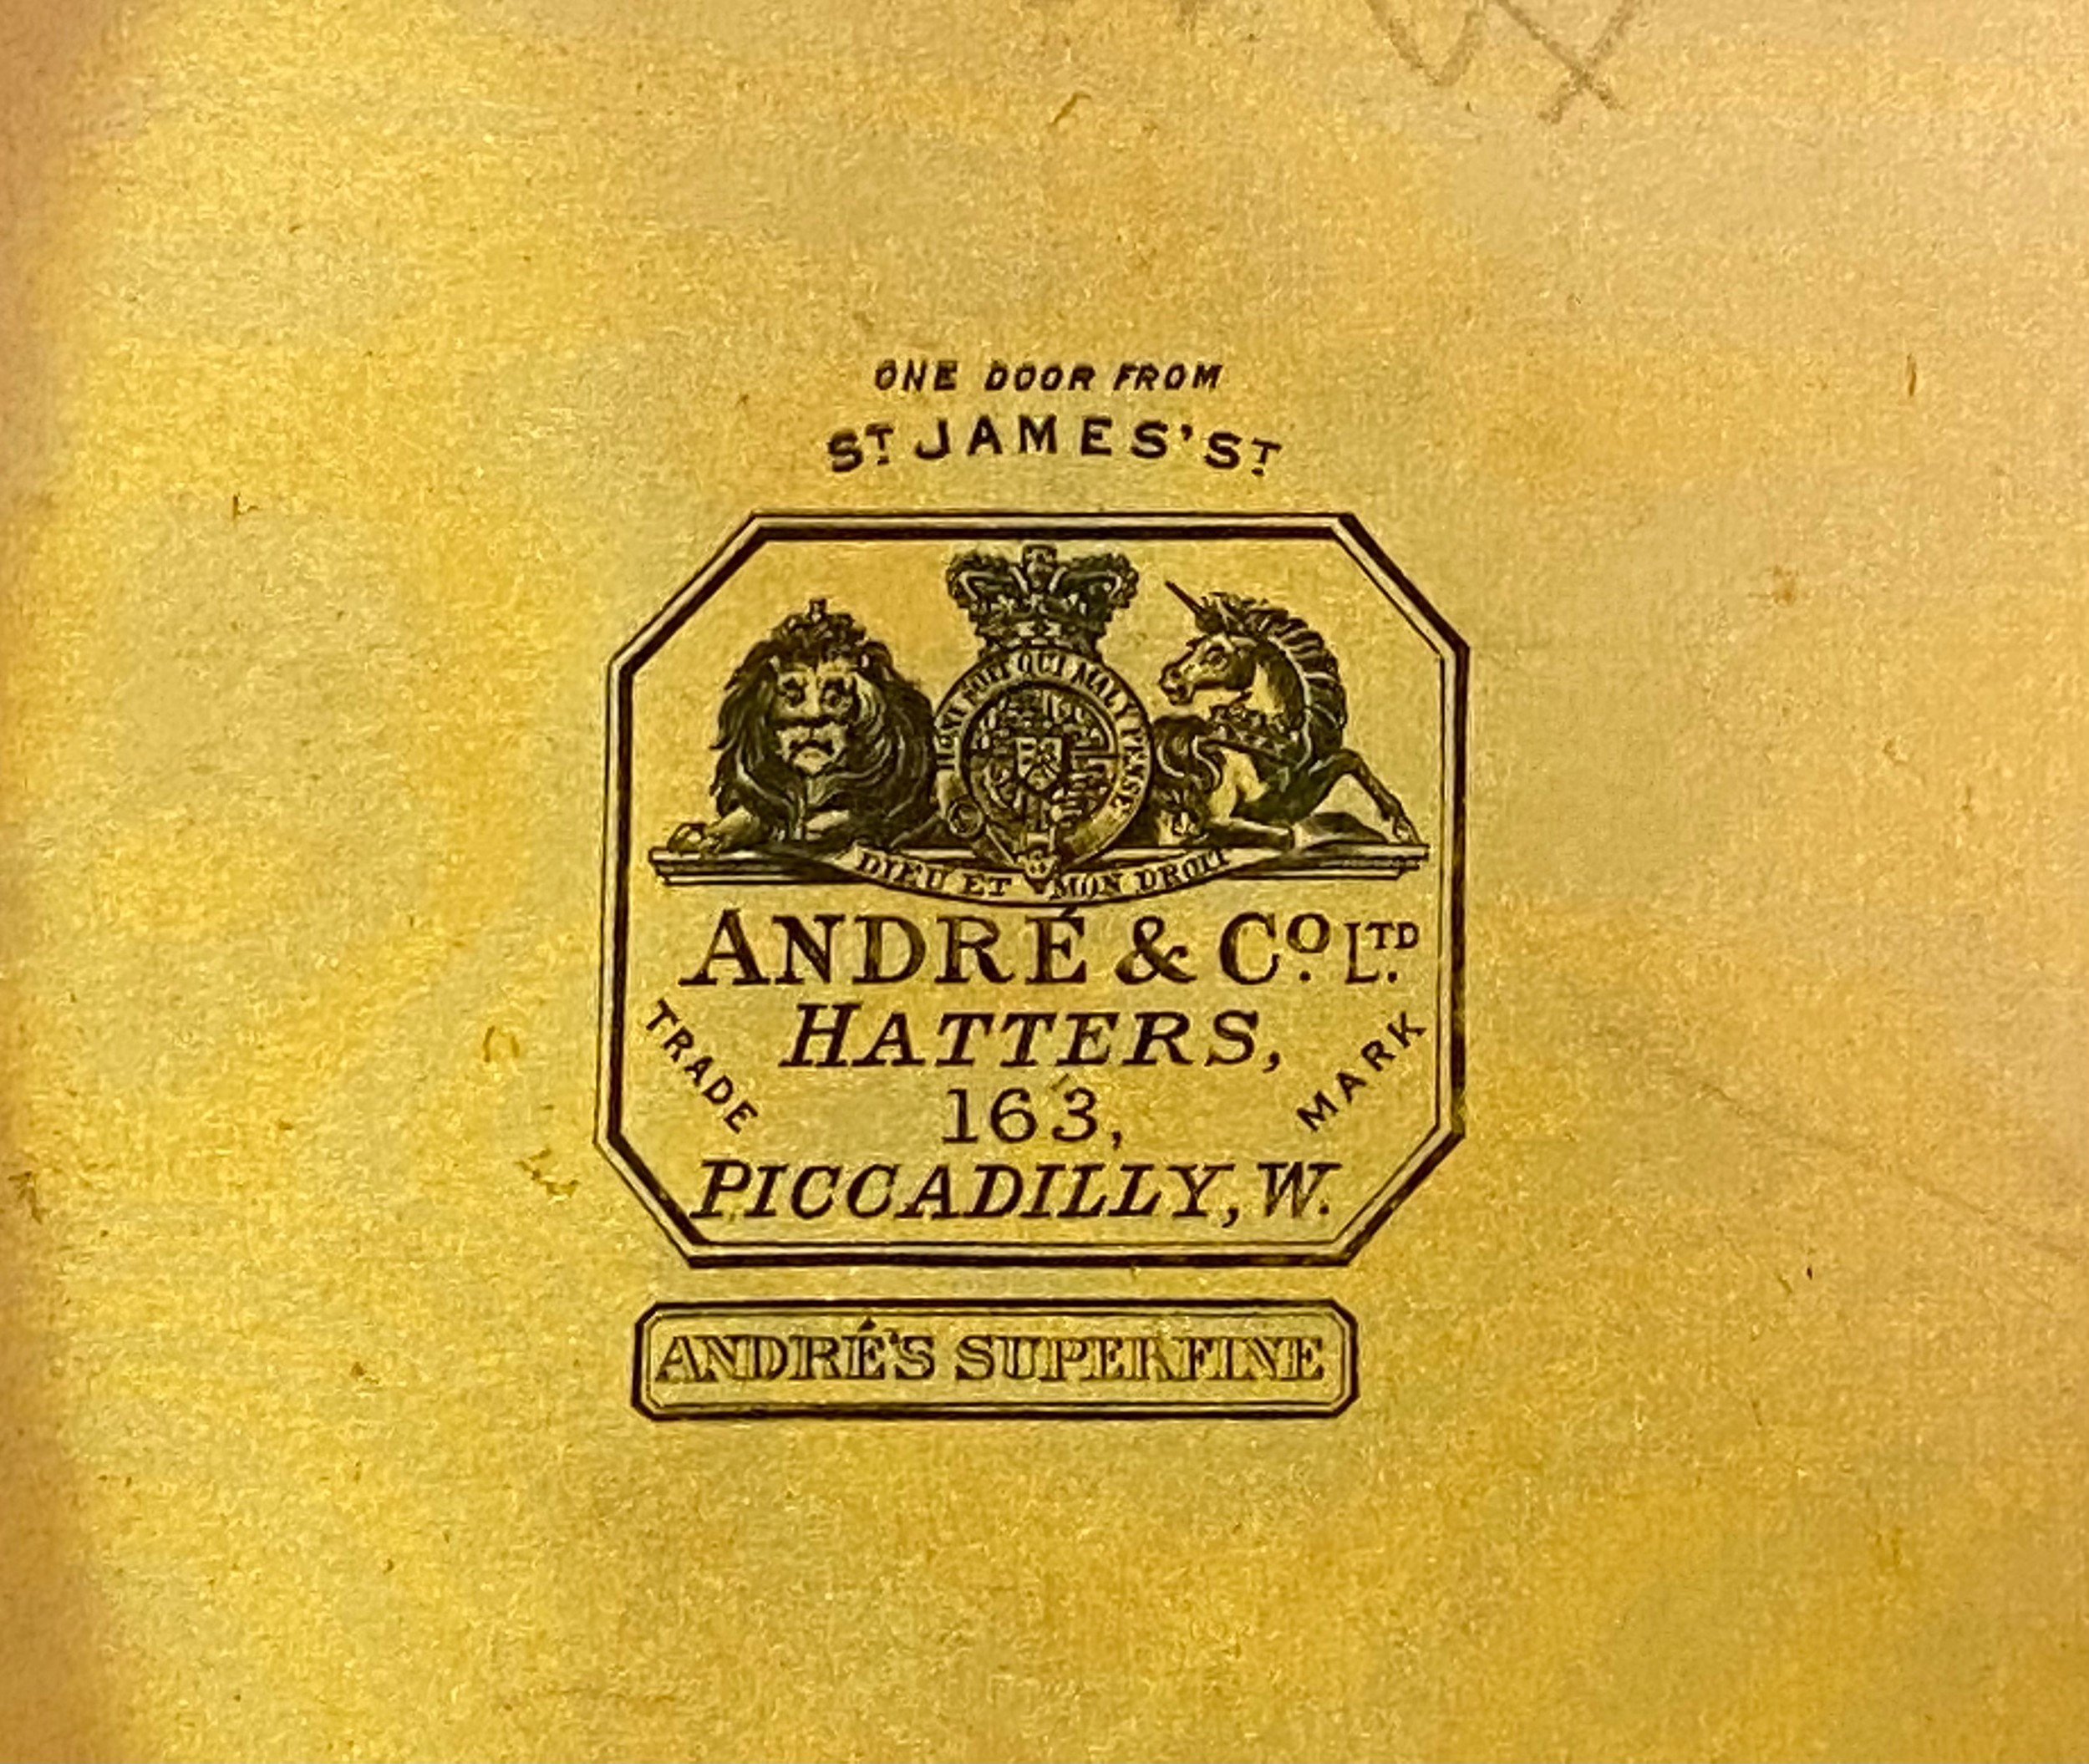 A vintage black silk top hat by Andre & Co. Ltd. Hatters, 163 Piccadilly, W. Andres Superfine, - Image 2 of 8